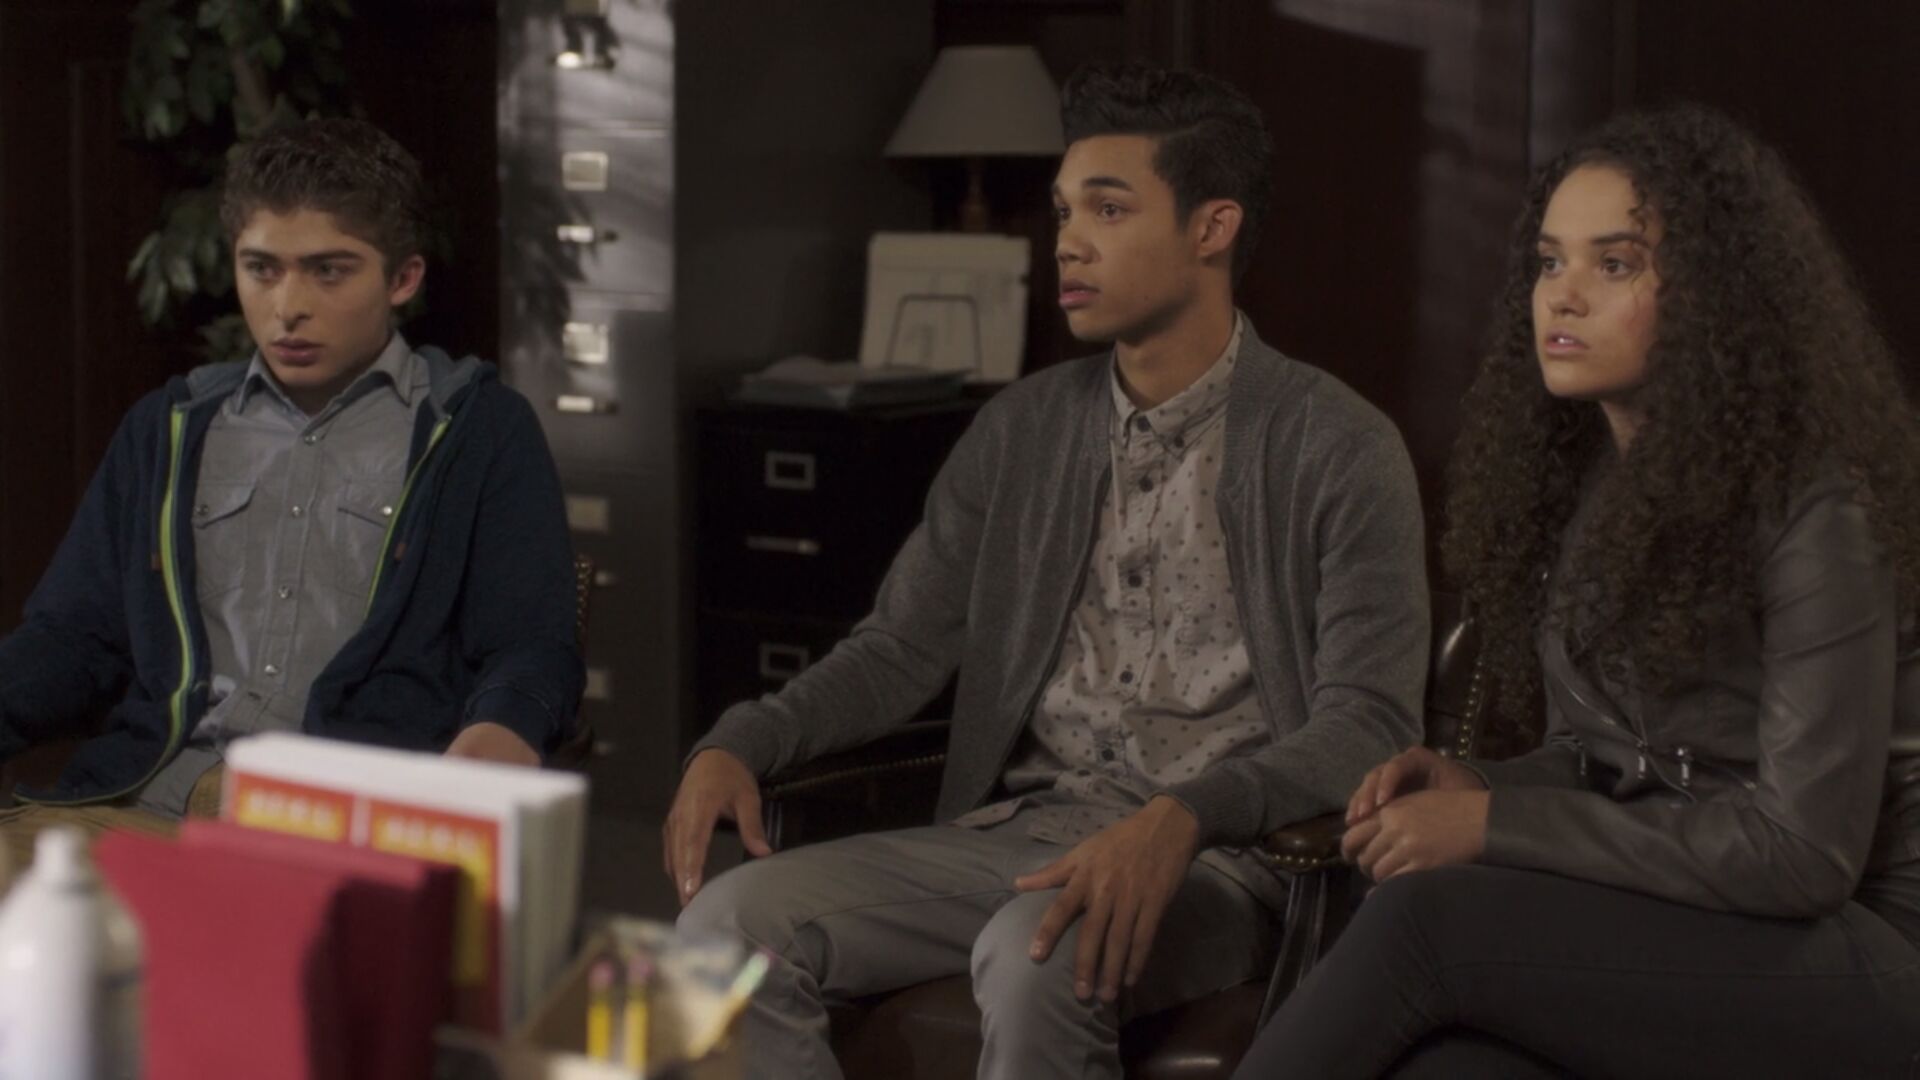 Roshon Fegan in Mostly Ghostly: Have You Met My Ghoulfriend?